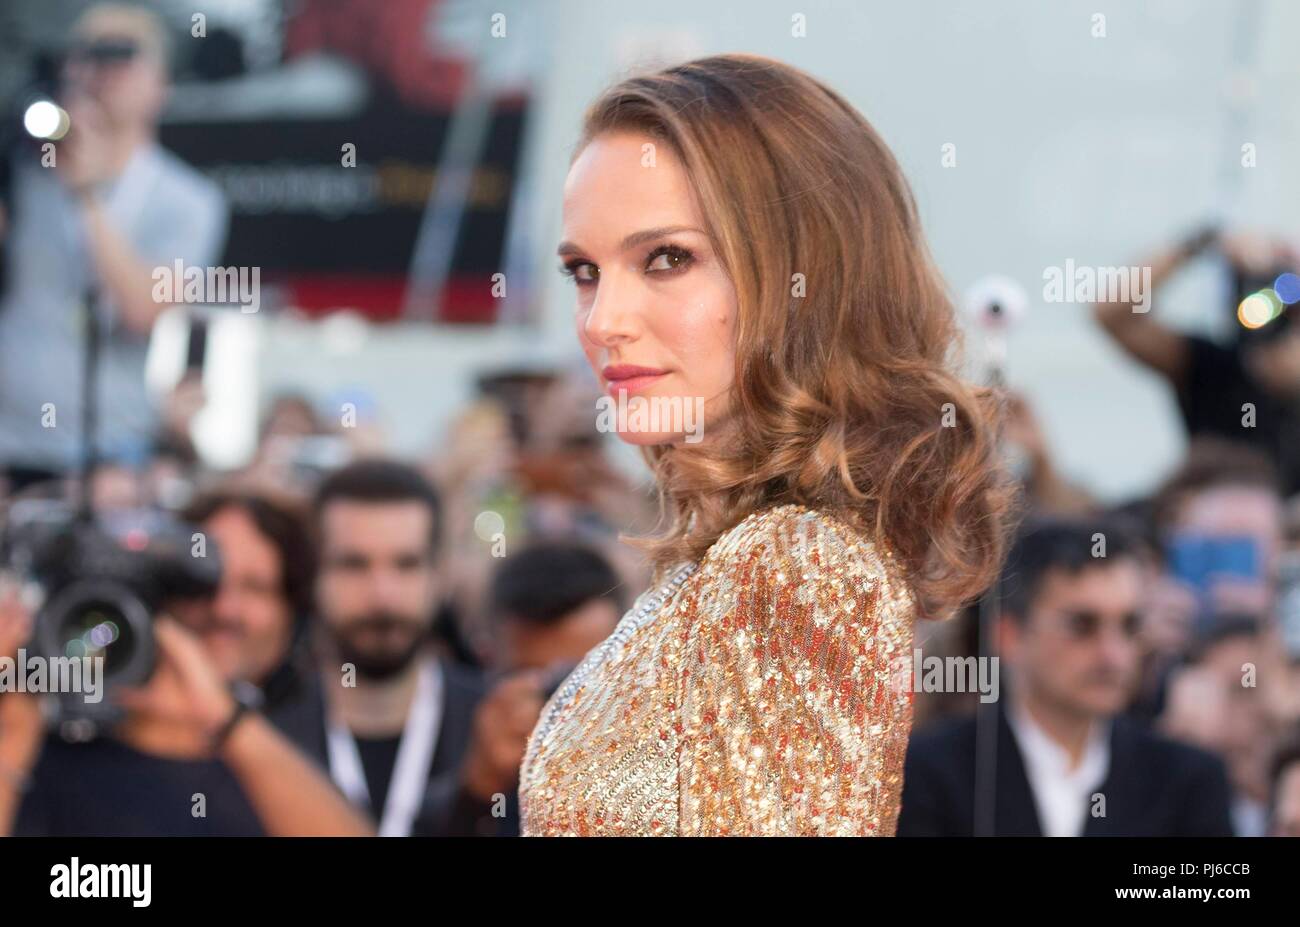 Venice, Italy. 04th Sep, 2018. Natalie Portman attends the premiere of 'Vox Lux' during the 75th Venice Film Festival at Palazzo del Cinema in Venice, Italy, on 04 September 2018. | usage worldwide Credit: dpa/Alamy Live News Stock Photo